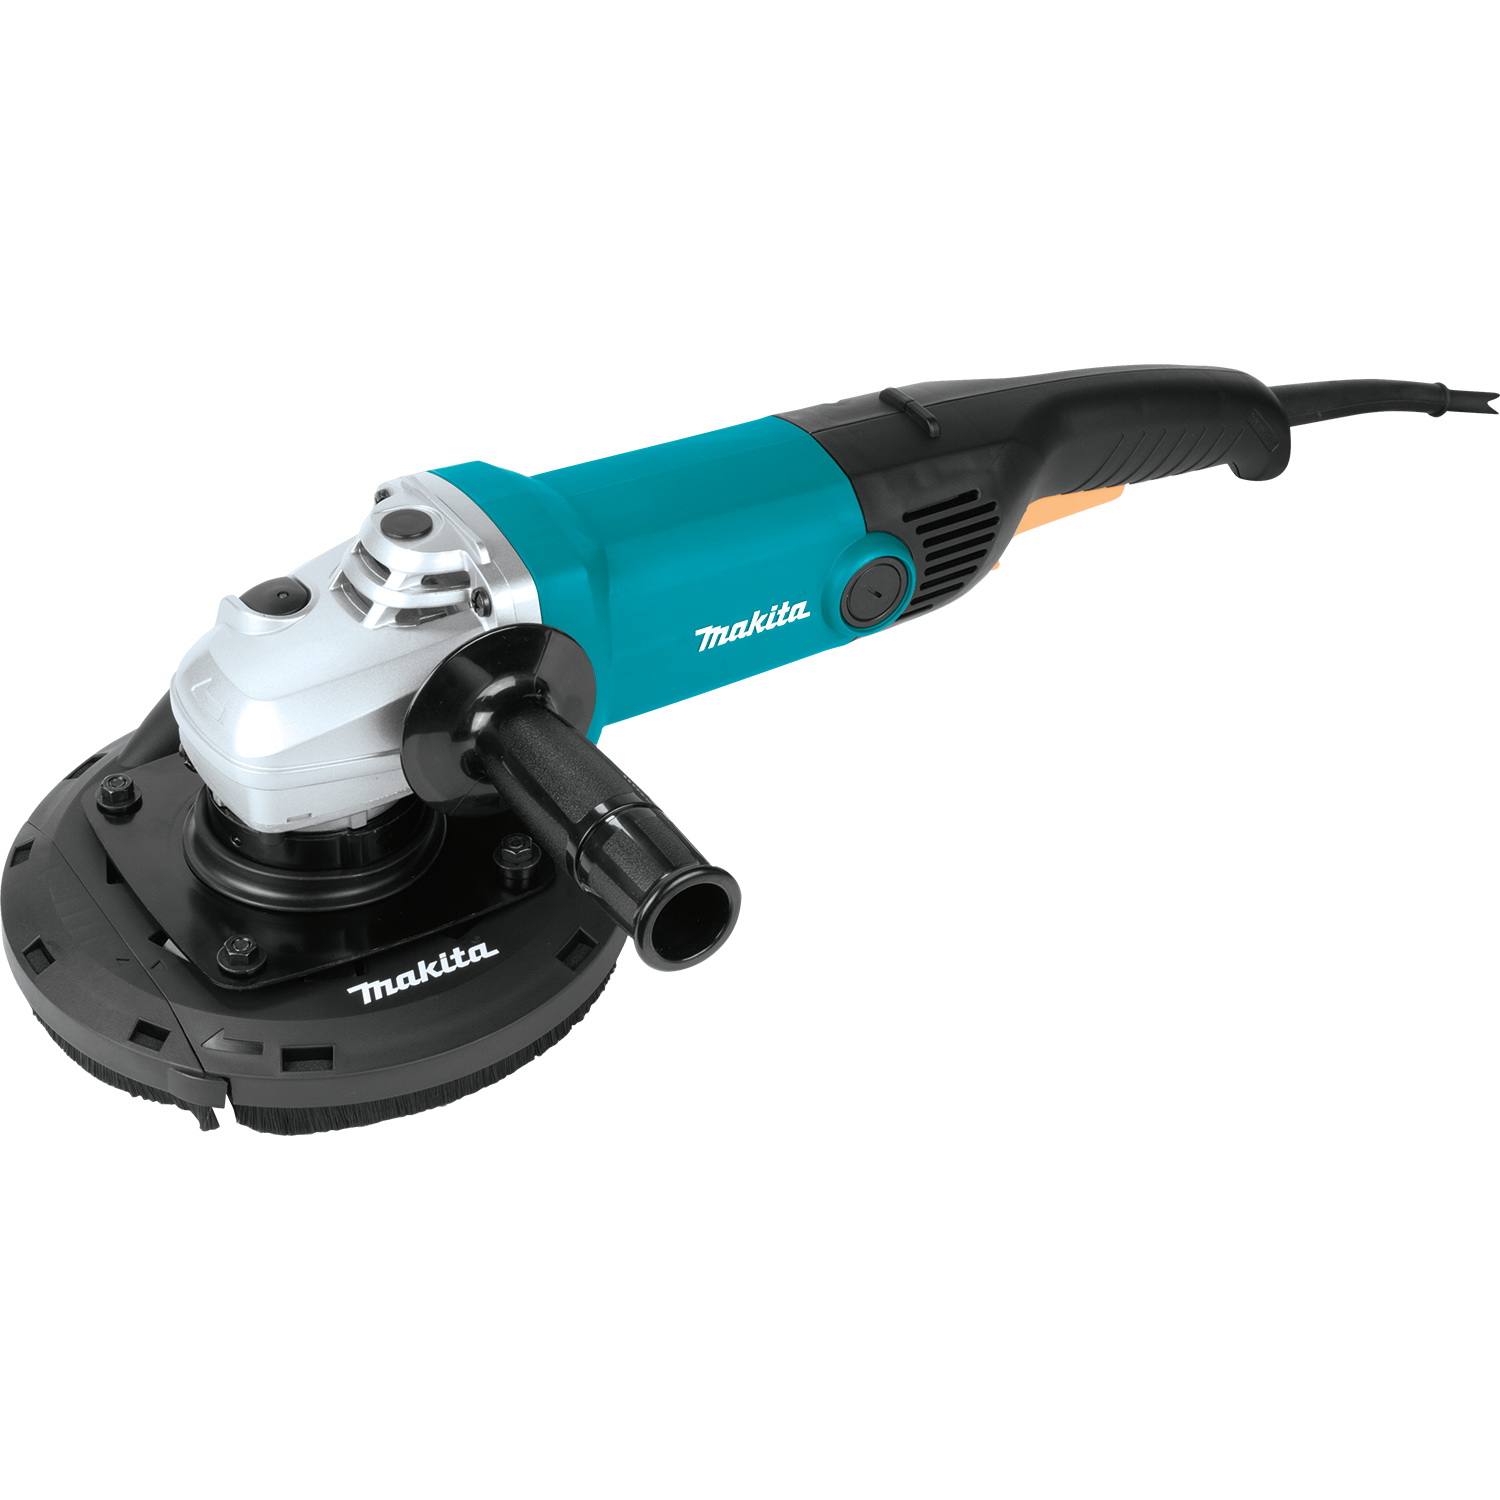 Makita GA7011C Angle Grinder, 15 A, 5/8-11 Spindle, 7 in Dia Wheel, 6000 rpm Speed - 7